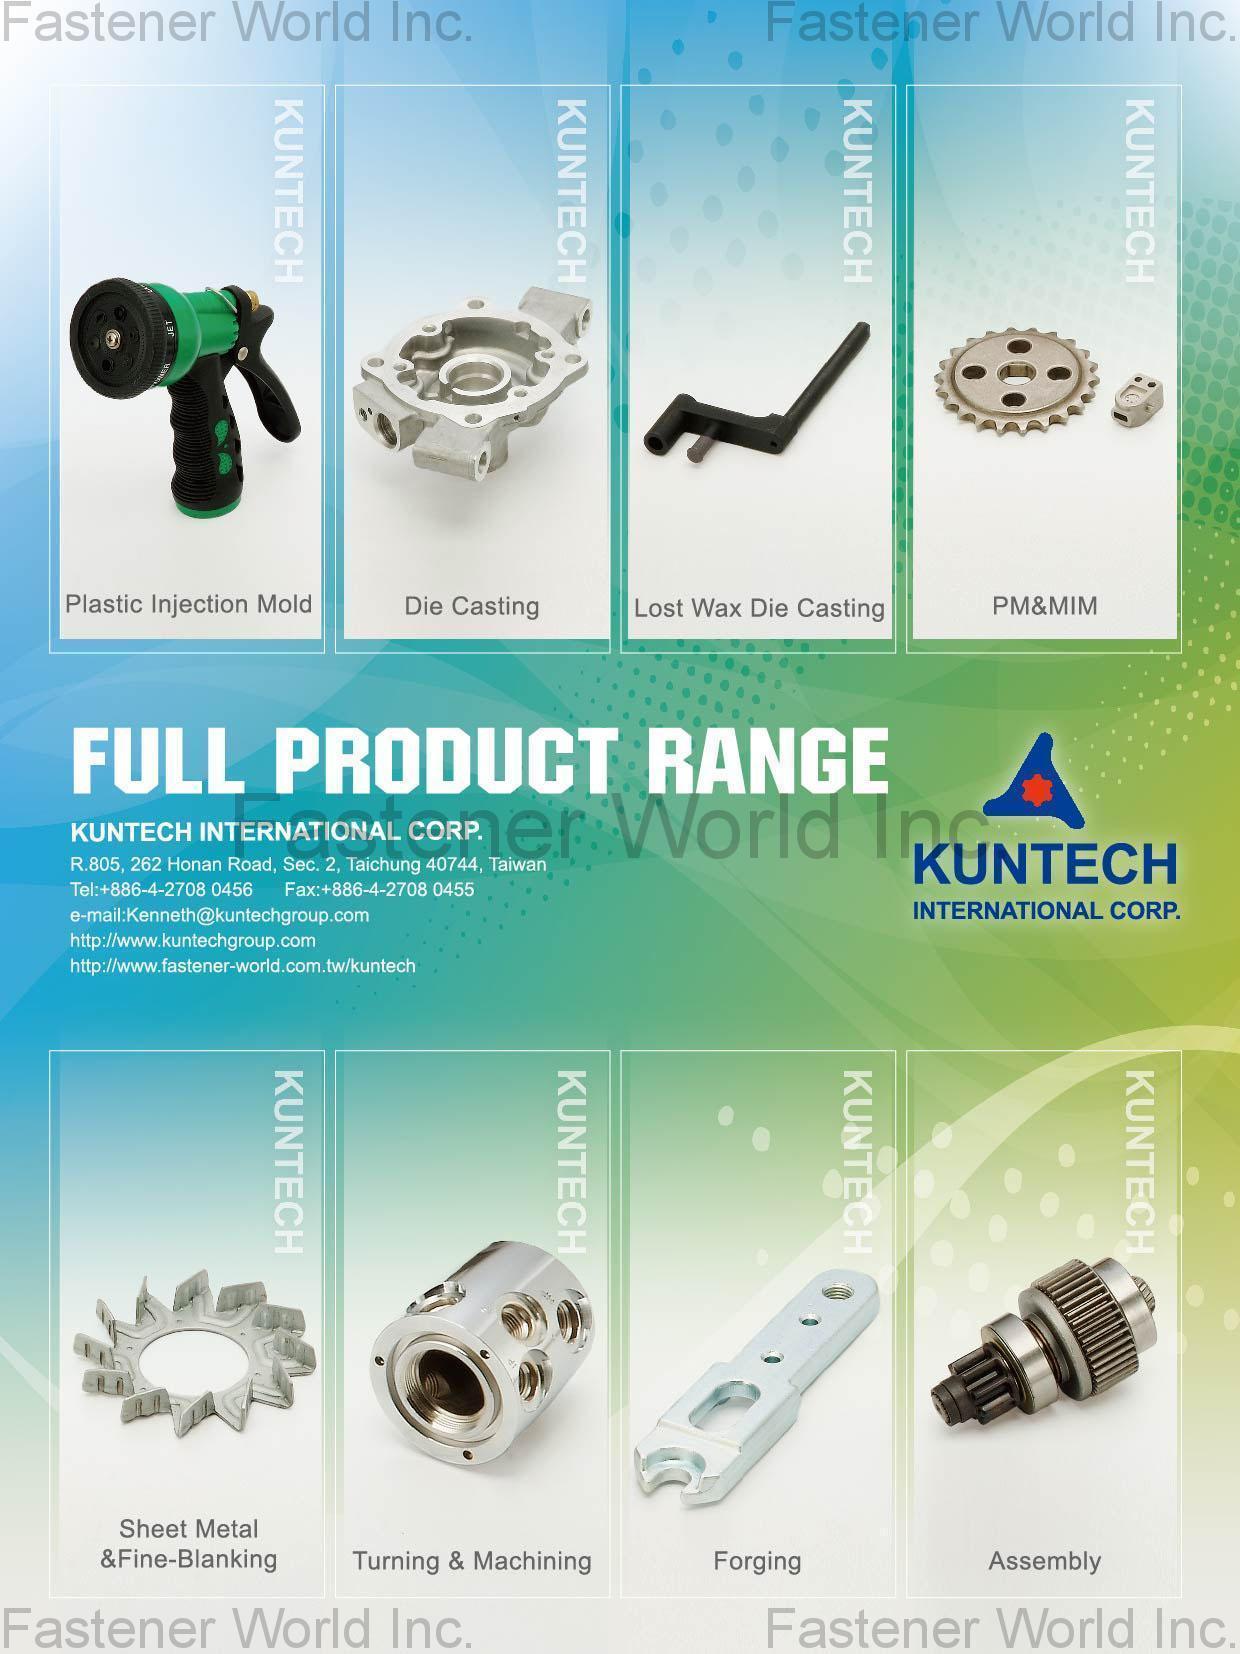 KUNTECH INTERNATIONAL CORP. , Plastic Injection Mold, Die Casting, Lost Wax Die Casting, PM&MIM, Sheet Metal & Fine-Blanking, Turning & Machining, Forging, Assembly , Die Casting